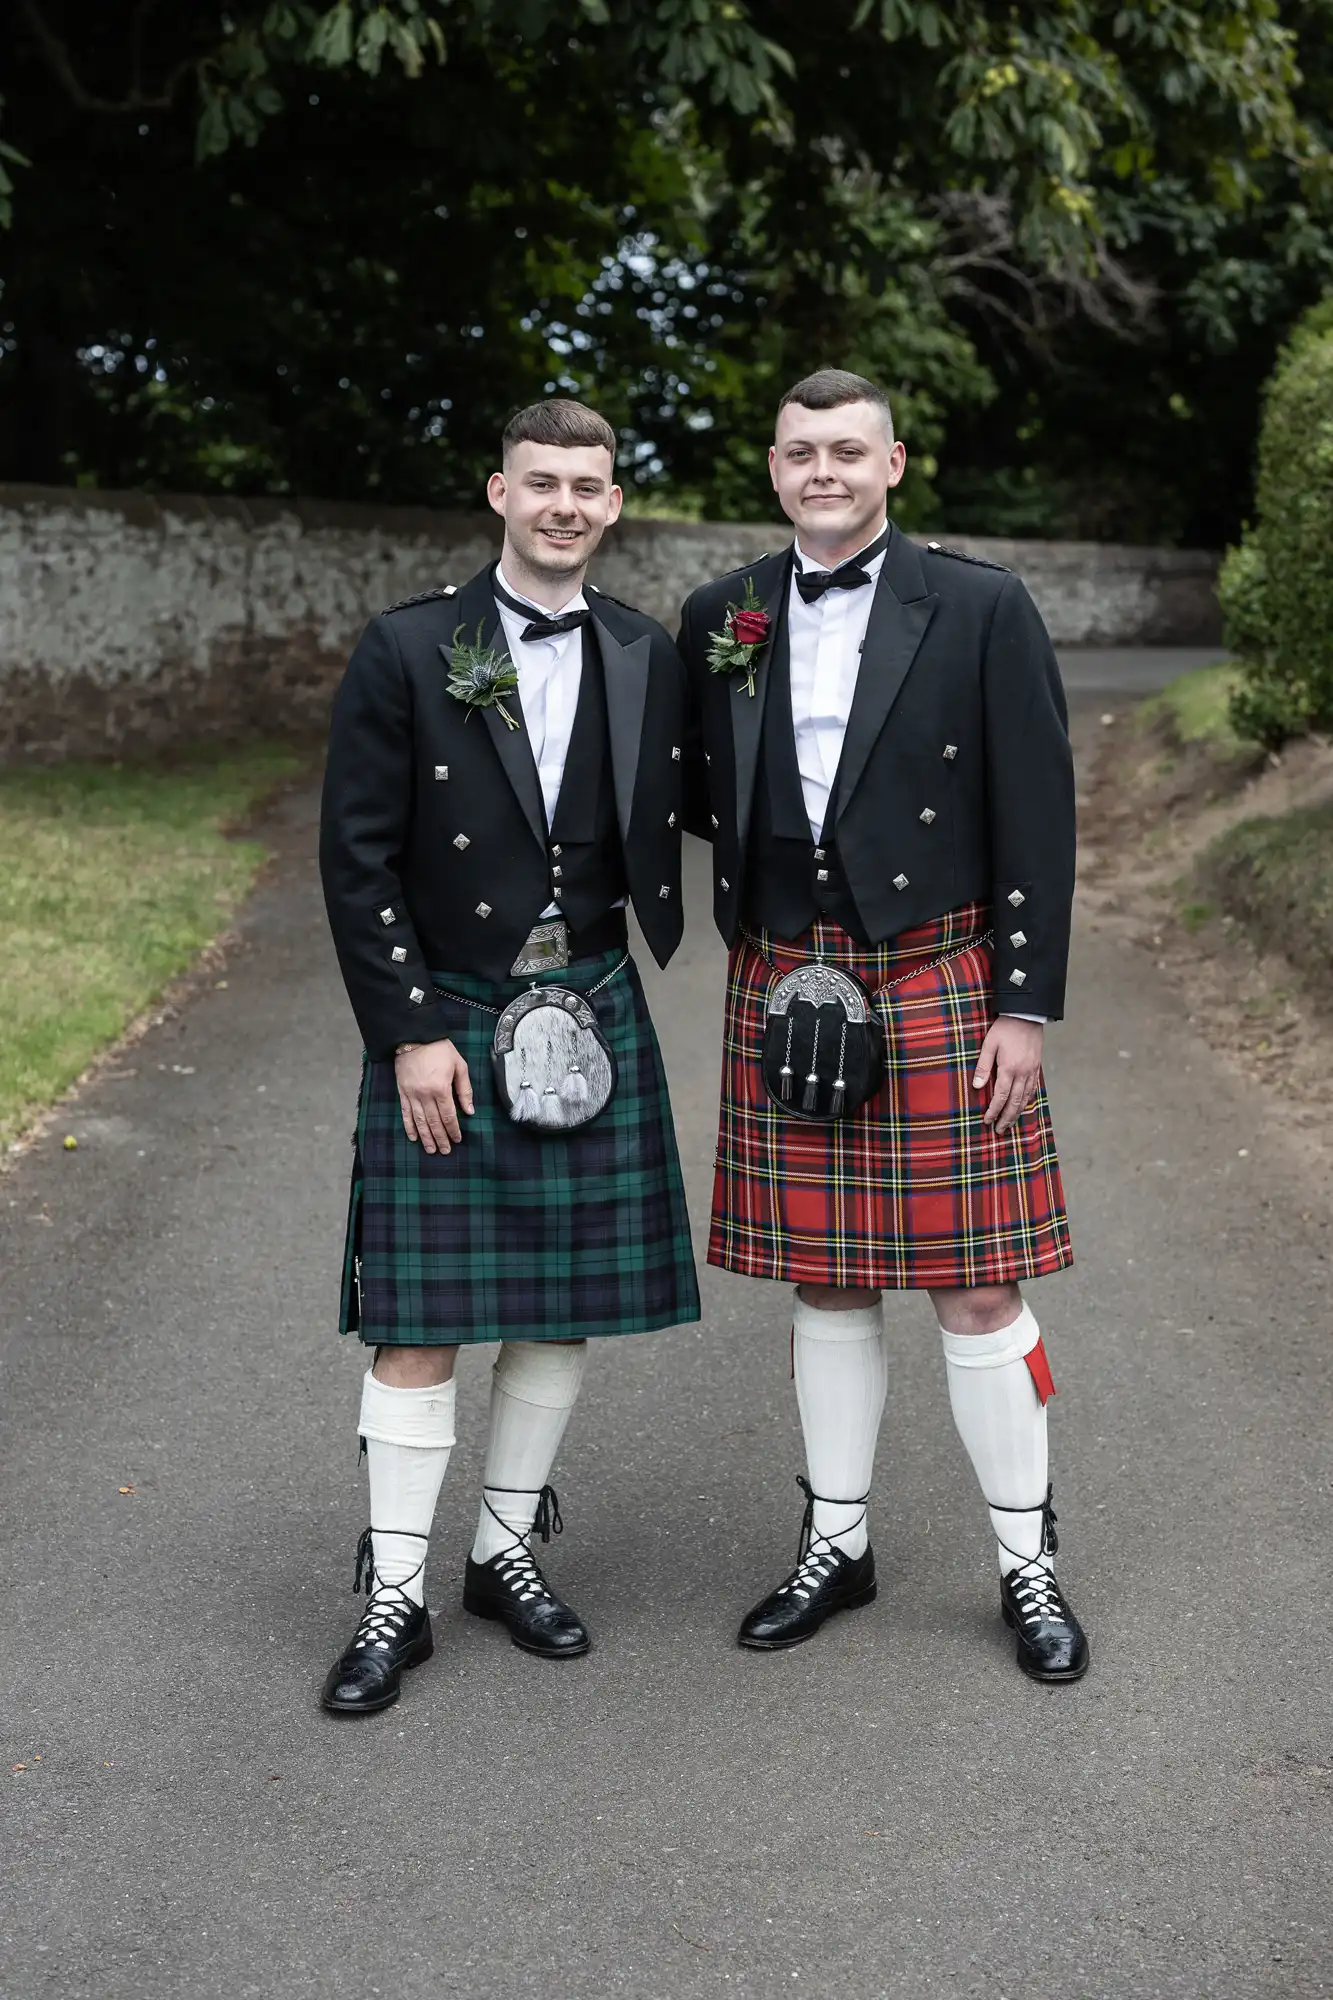 Two men in traditional Scottish attire, including kilts and sporran, smiling and standing on a path lined with greenery.